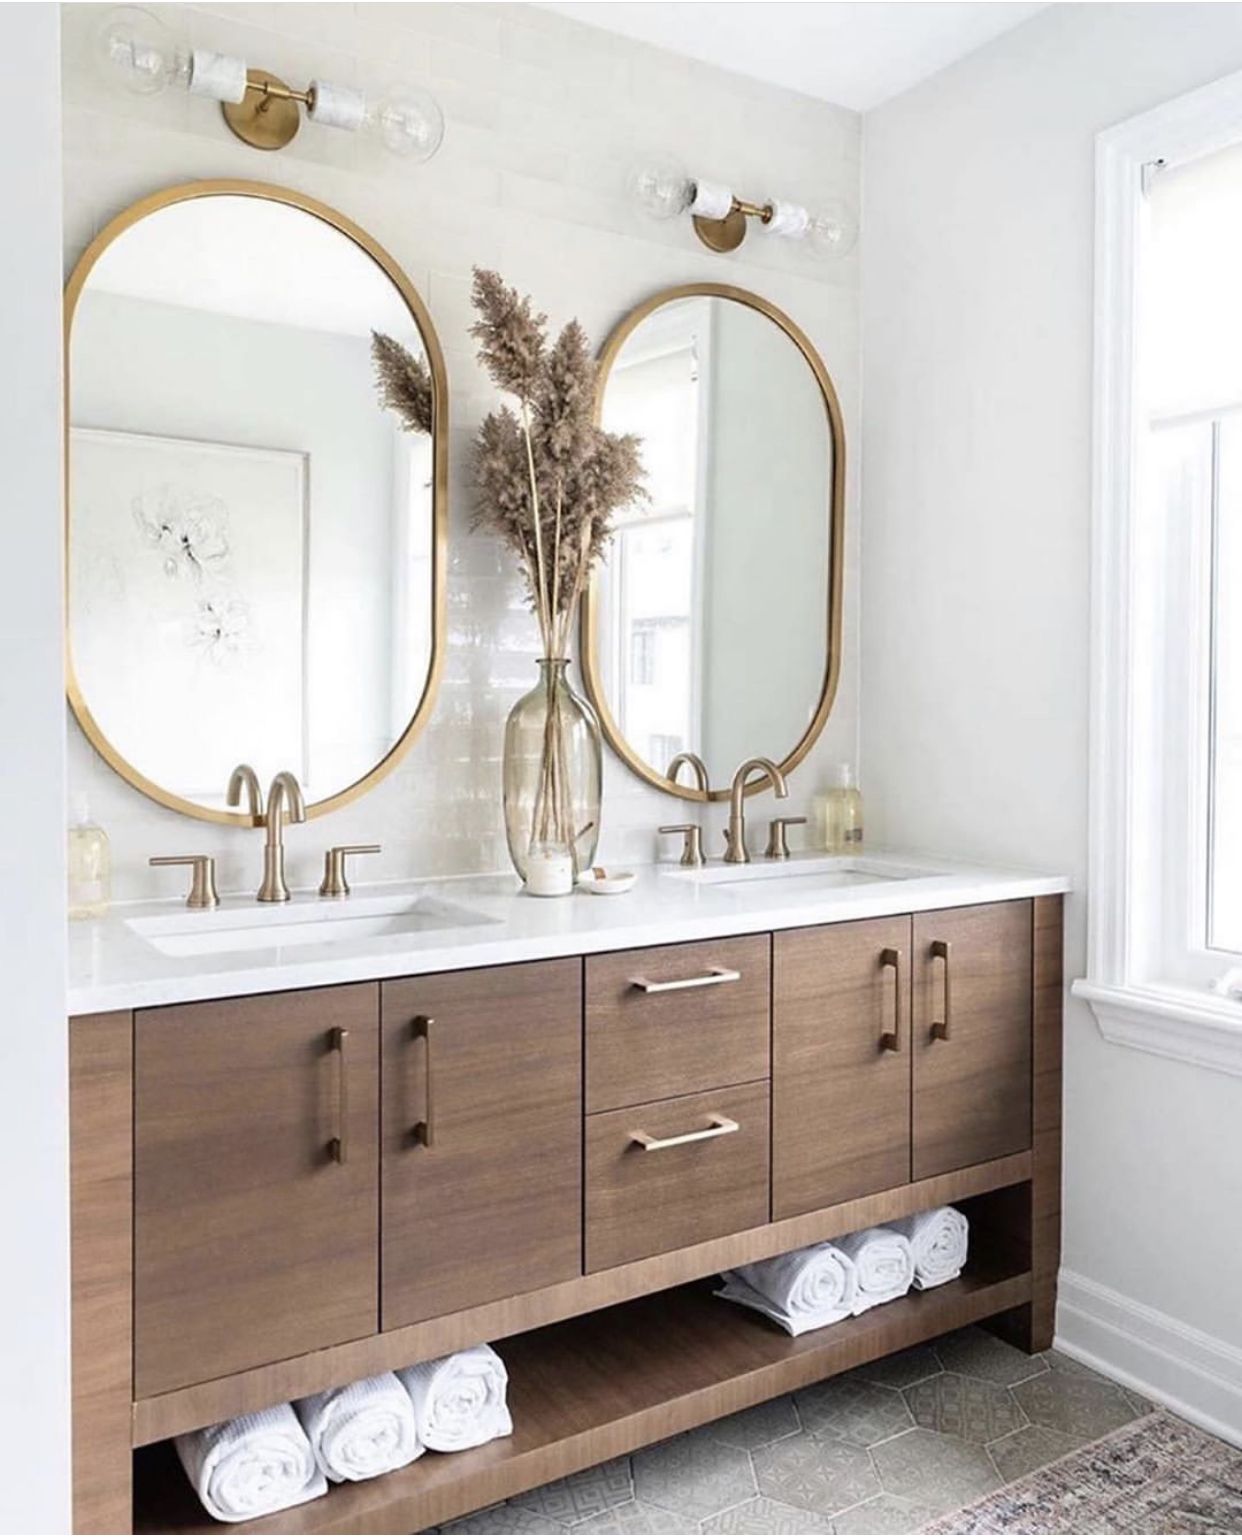 Add elegance in your bathroom with oval
mirror